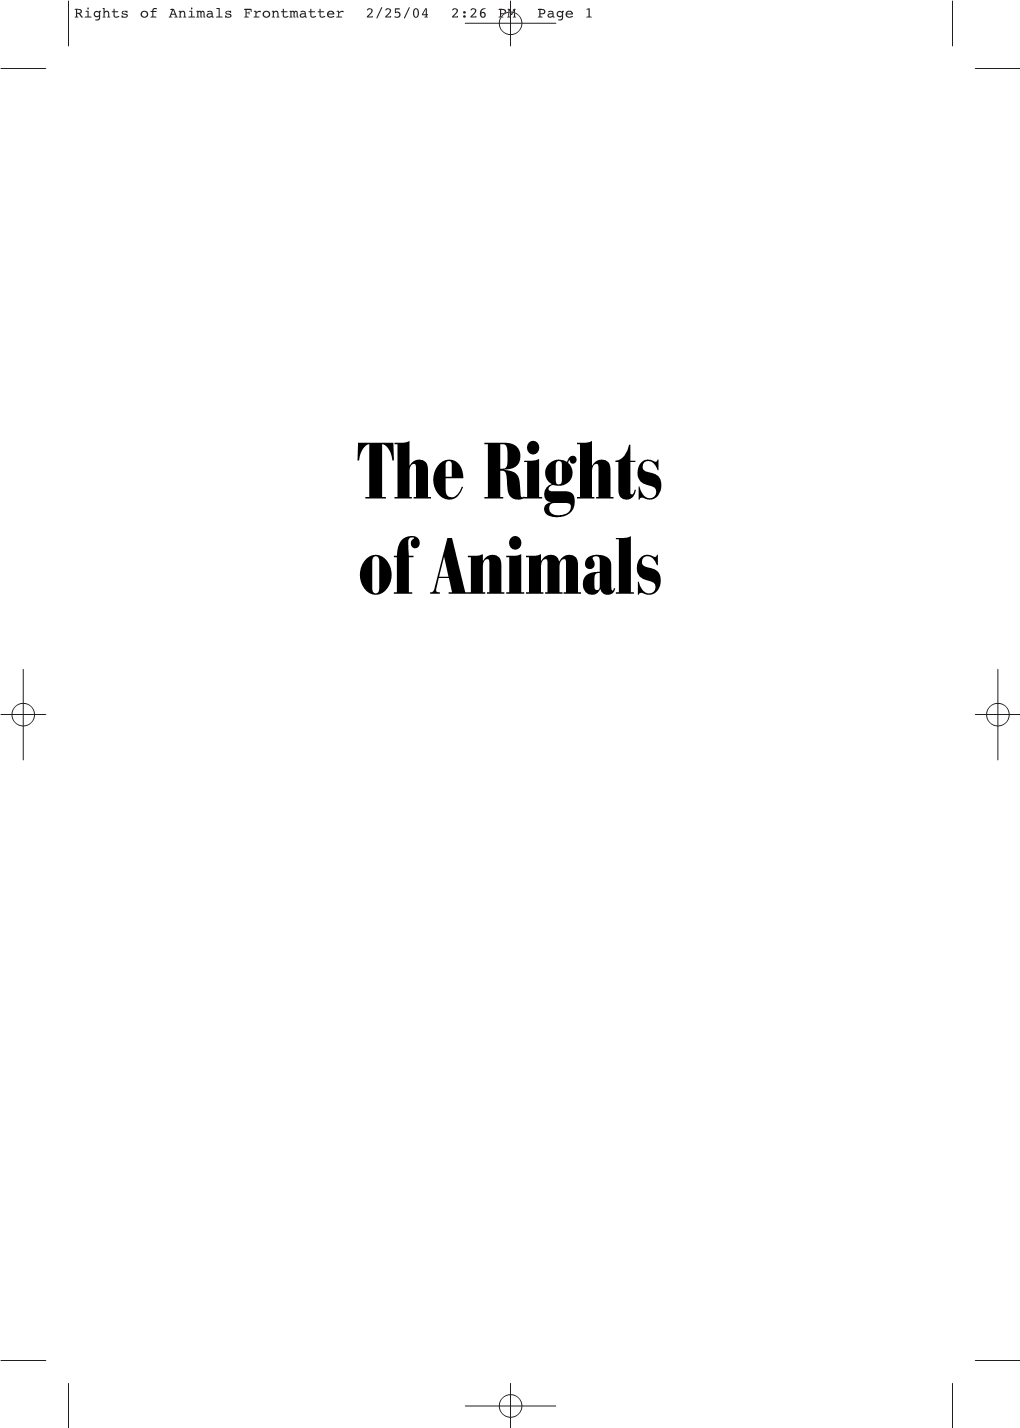 The Rights of Animals Rights of Animals Frontmatter 2/25/04 2:26 PM Page 2